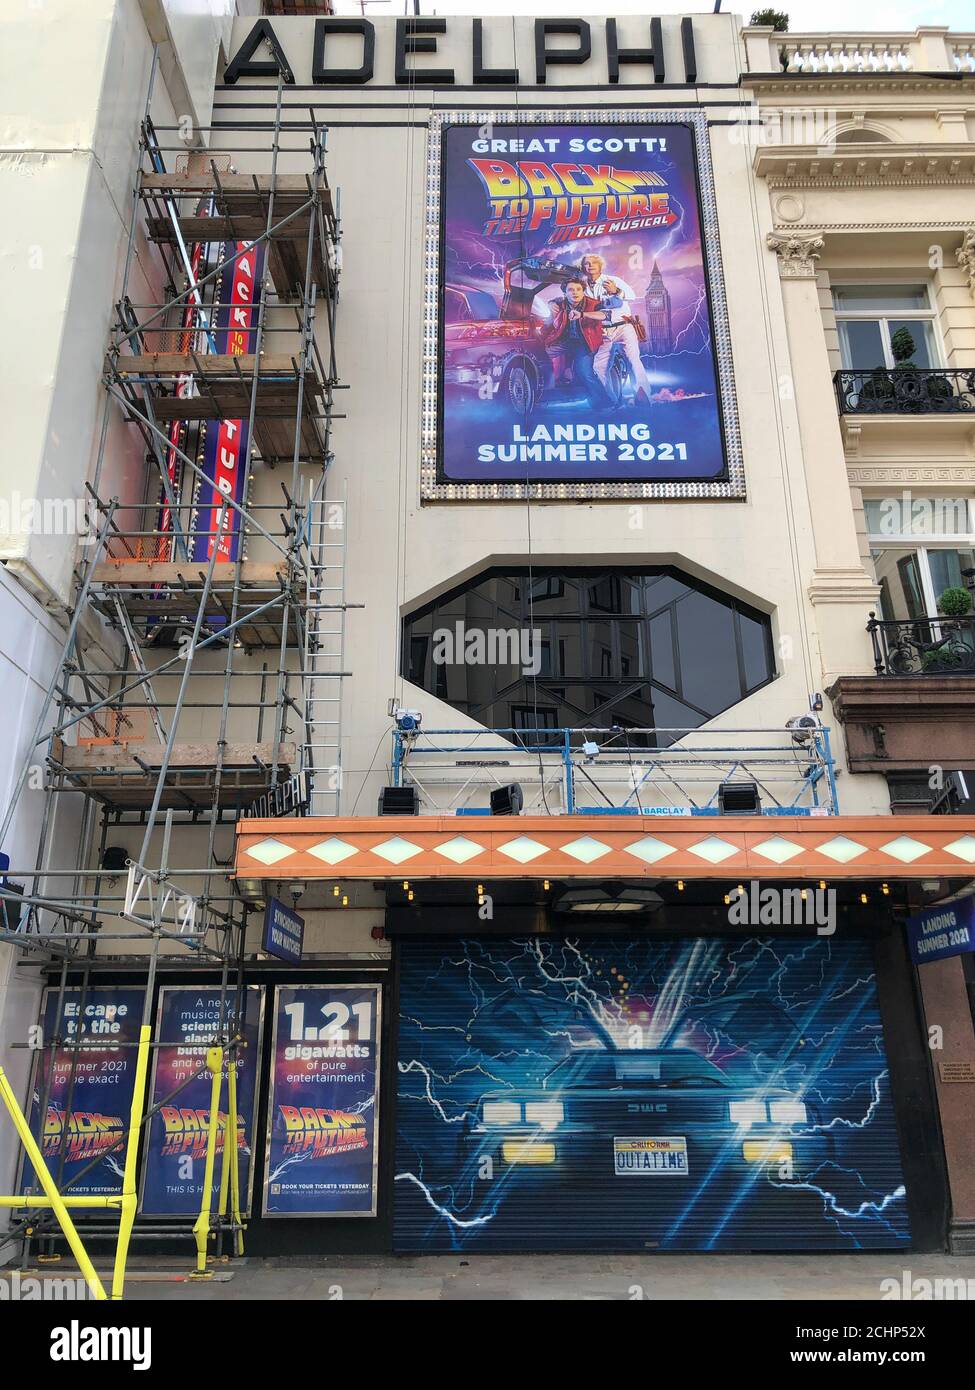 The Adelphi Theatre in London's West End was showing the musical WAITRESS  when it was forced to close on 16th March 2020 as a result of the COVID-19  pandemic. Now undergoing renovations